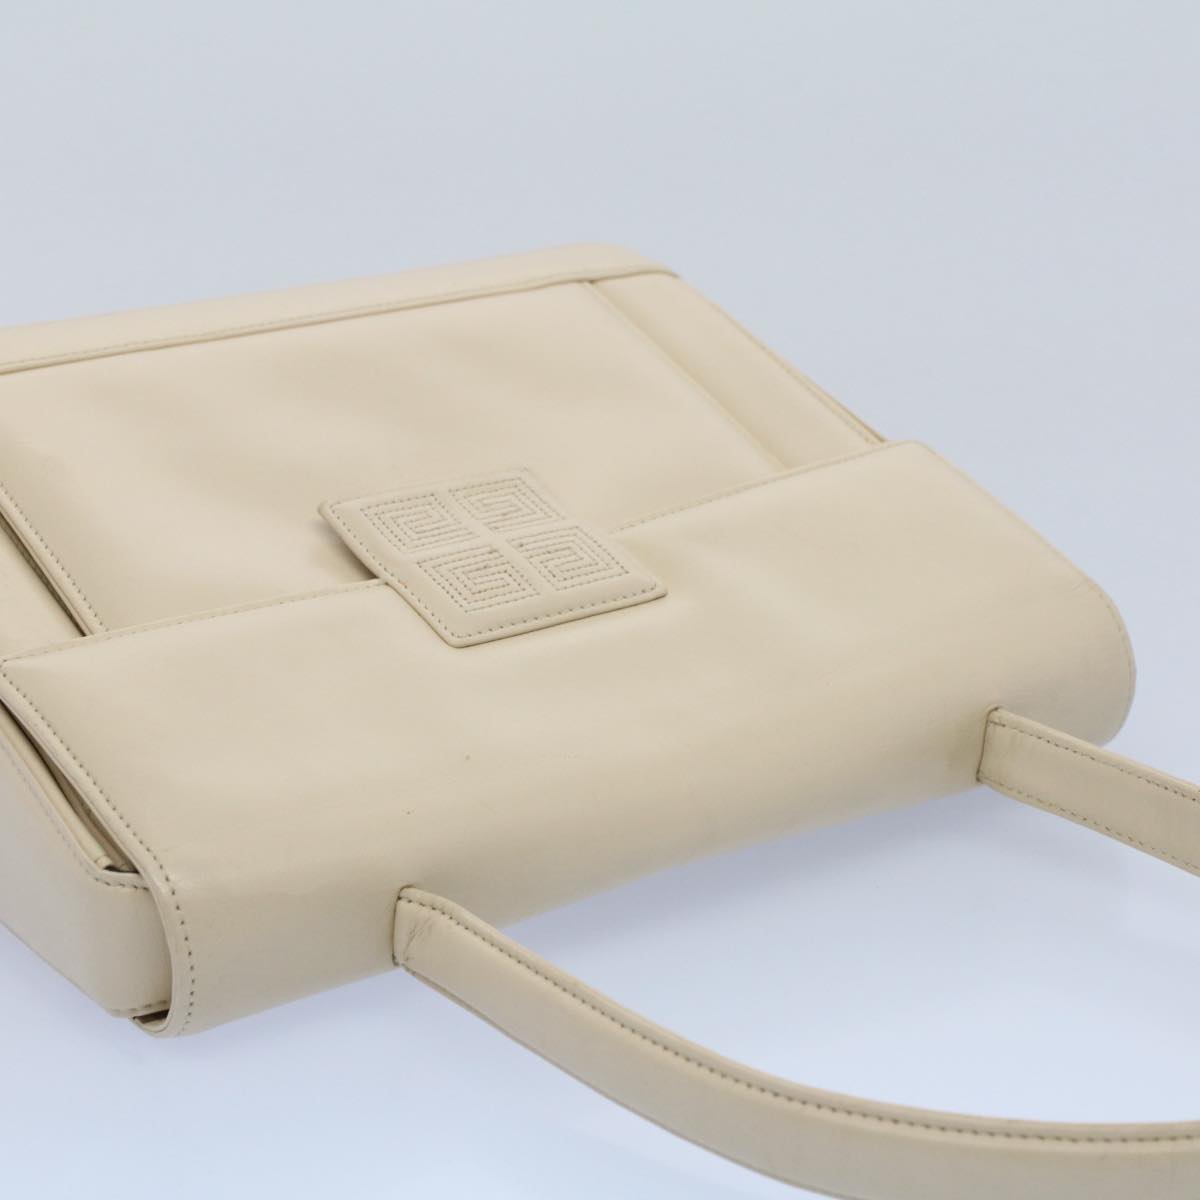 Givenchy Hand Bag Leather Beige Auth Ep1621